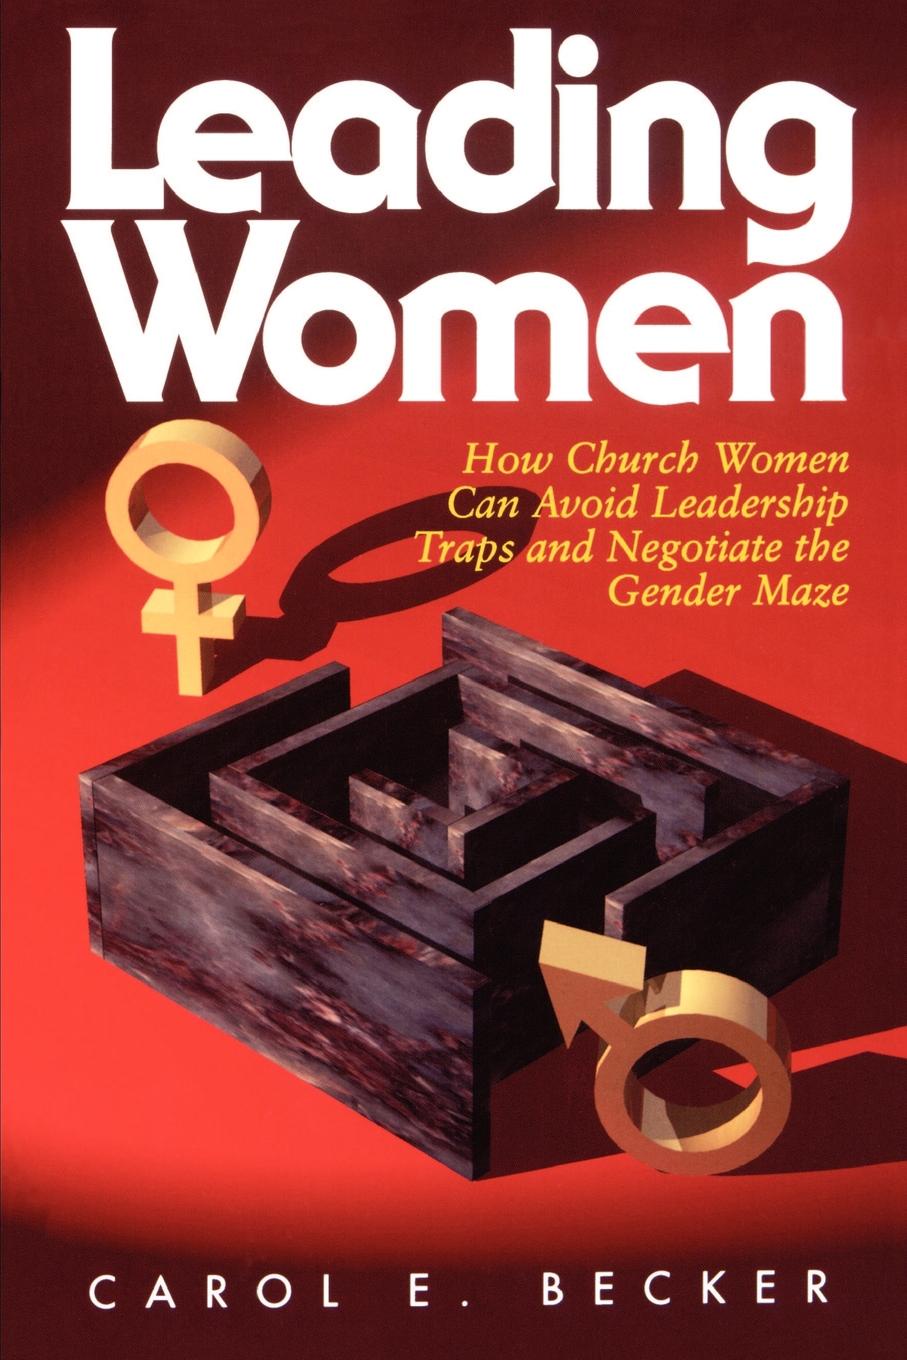 Leading Women. How Church Women Can Avoid Leadership Traps and Negotiate the Gender Maze